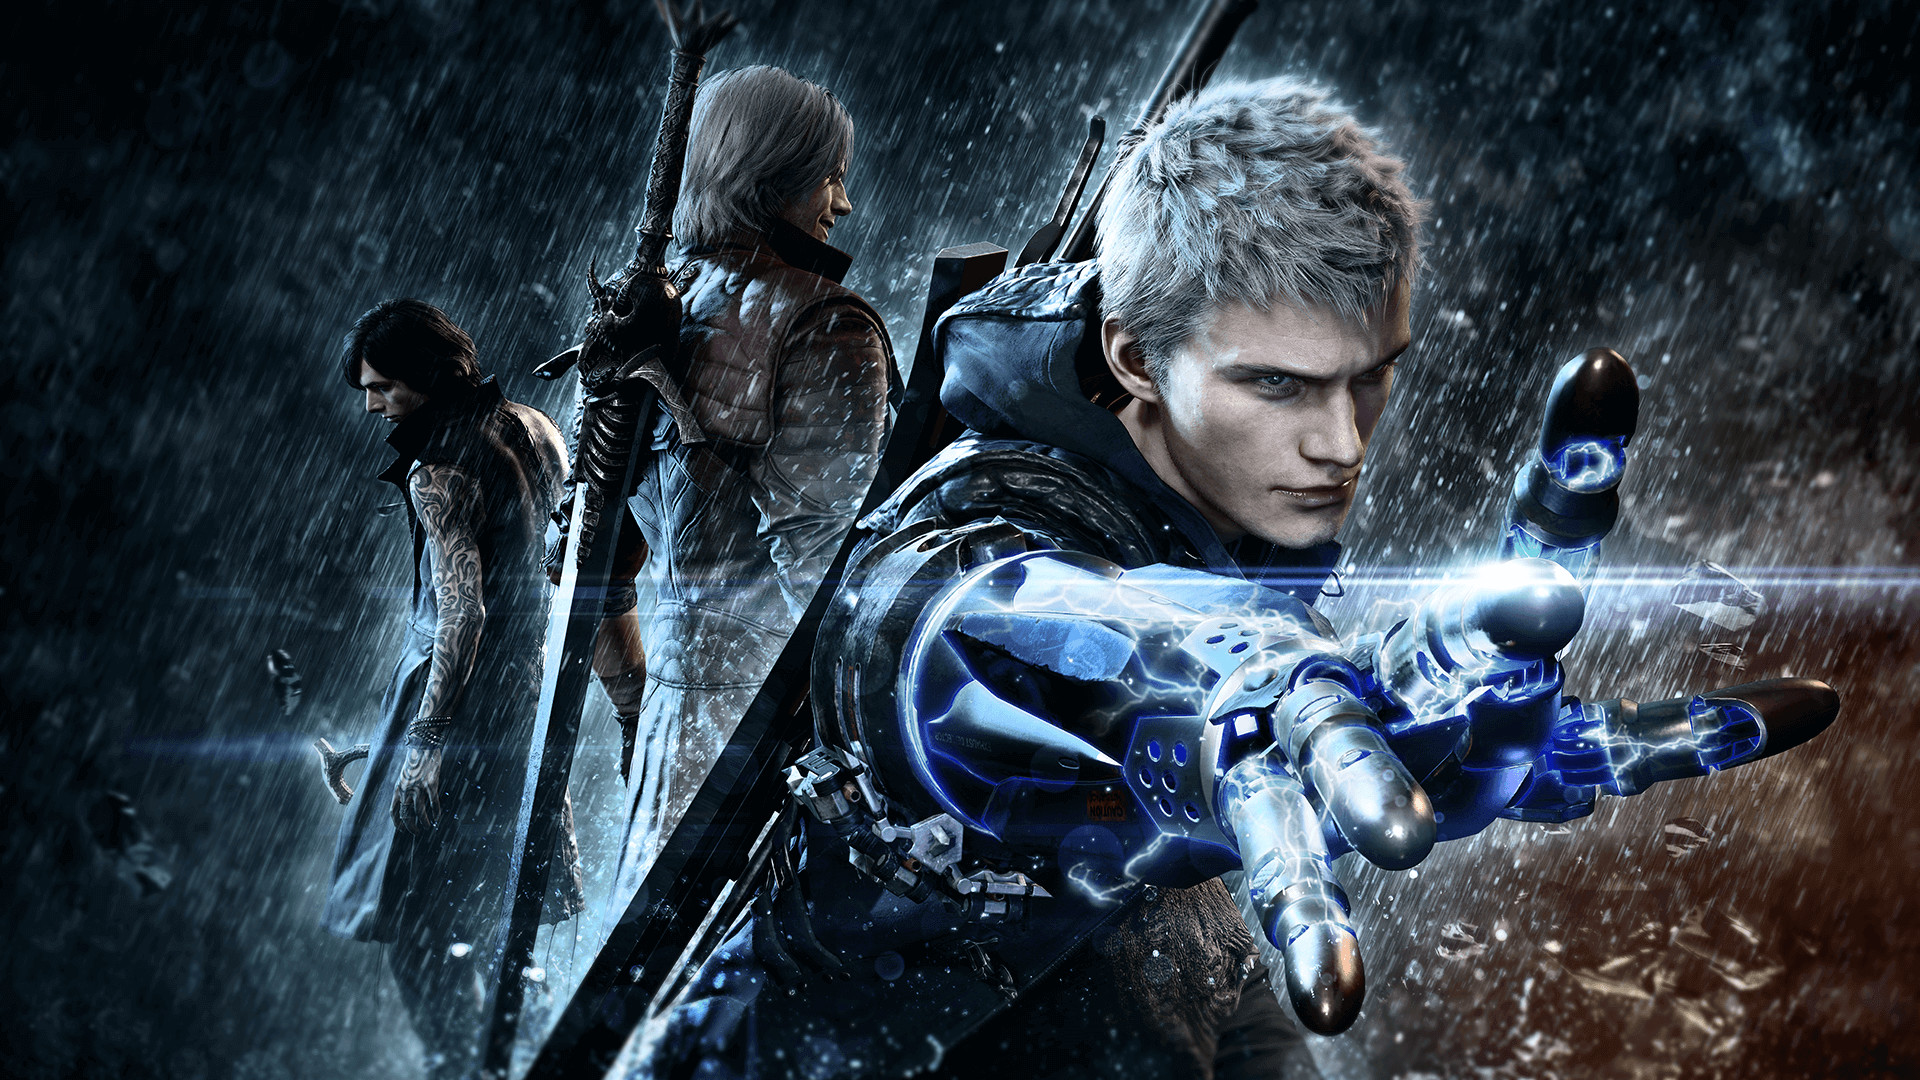 Devil May Cry 5 theme gets new vocal tracks after allegations